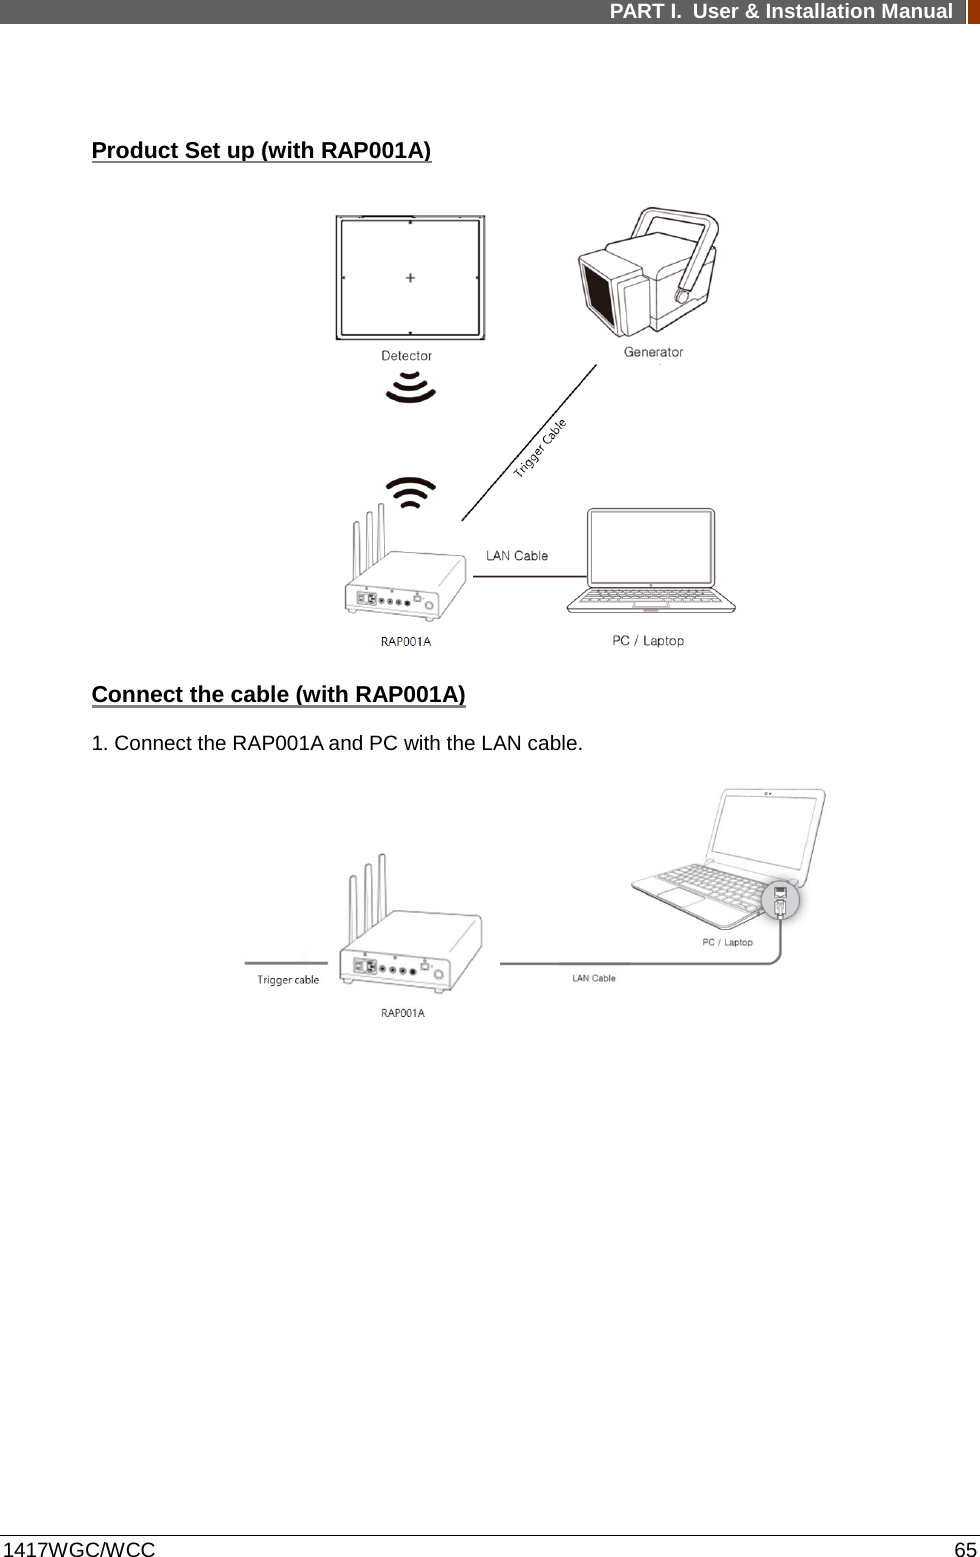 PART I. User &amp; Installation Manual  1417WGC/WCC 65  Product Set up (with RAP001A)  Connect the cable (with RAP001A) 1. Connect the RAP001A and PC with the LAN cable.    